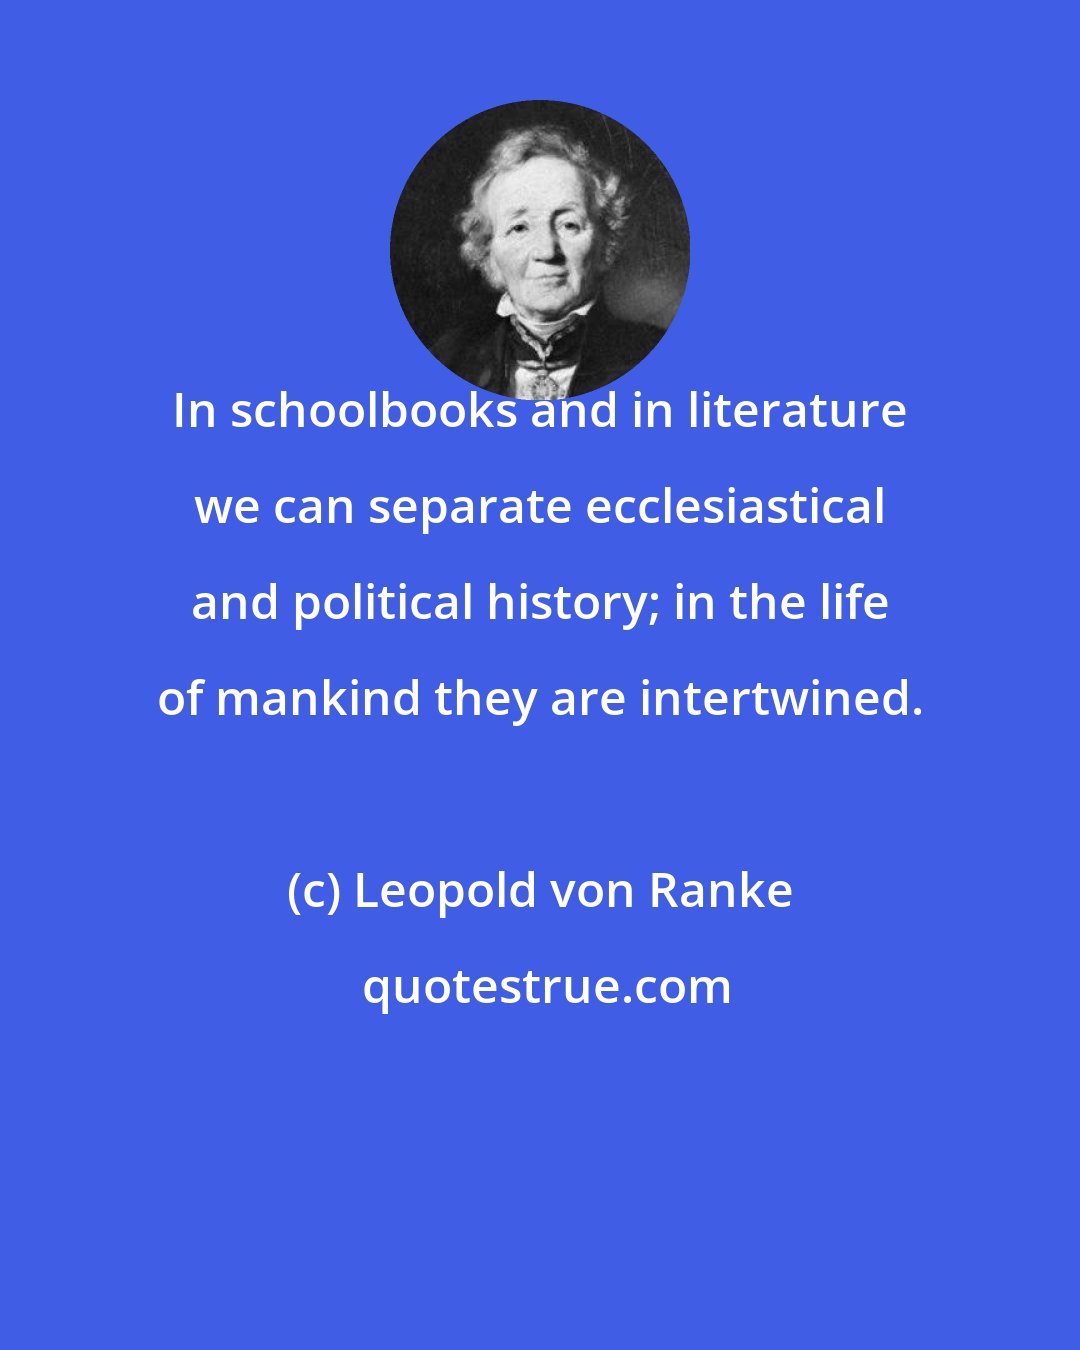 Leopold von Ranke: In schoolbooks and in literature we can separate ecclesiastical and political history; in the life of mankind they are intertwined.